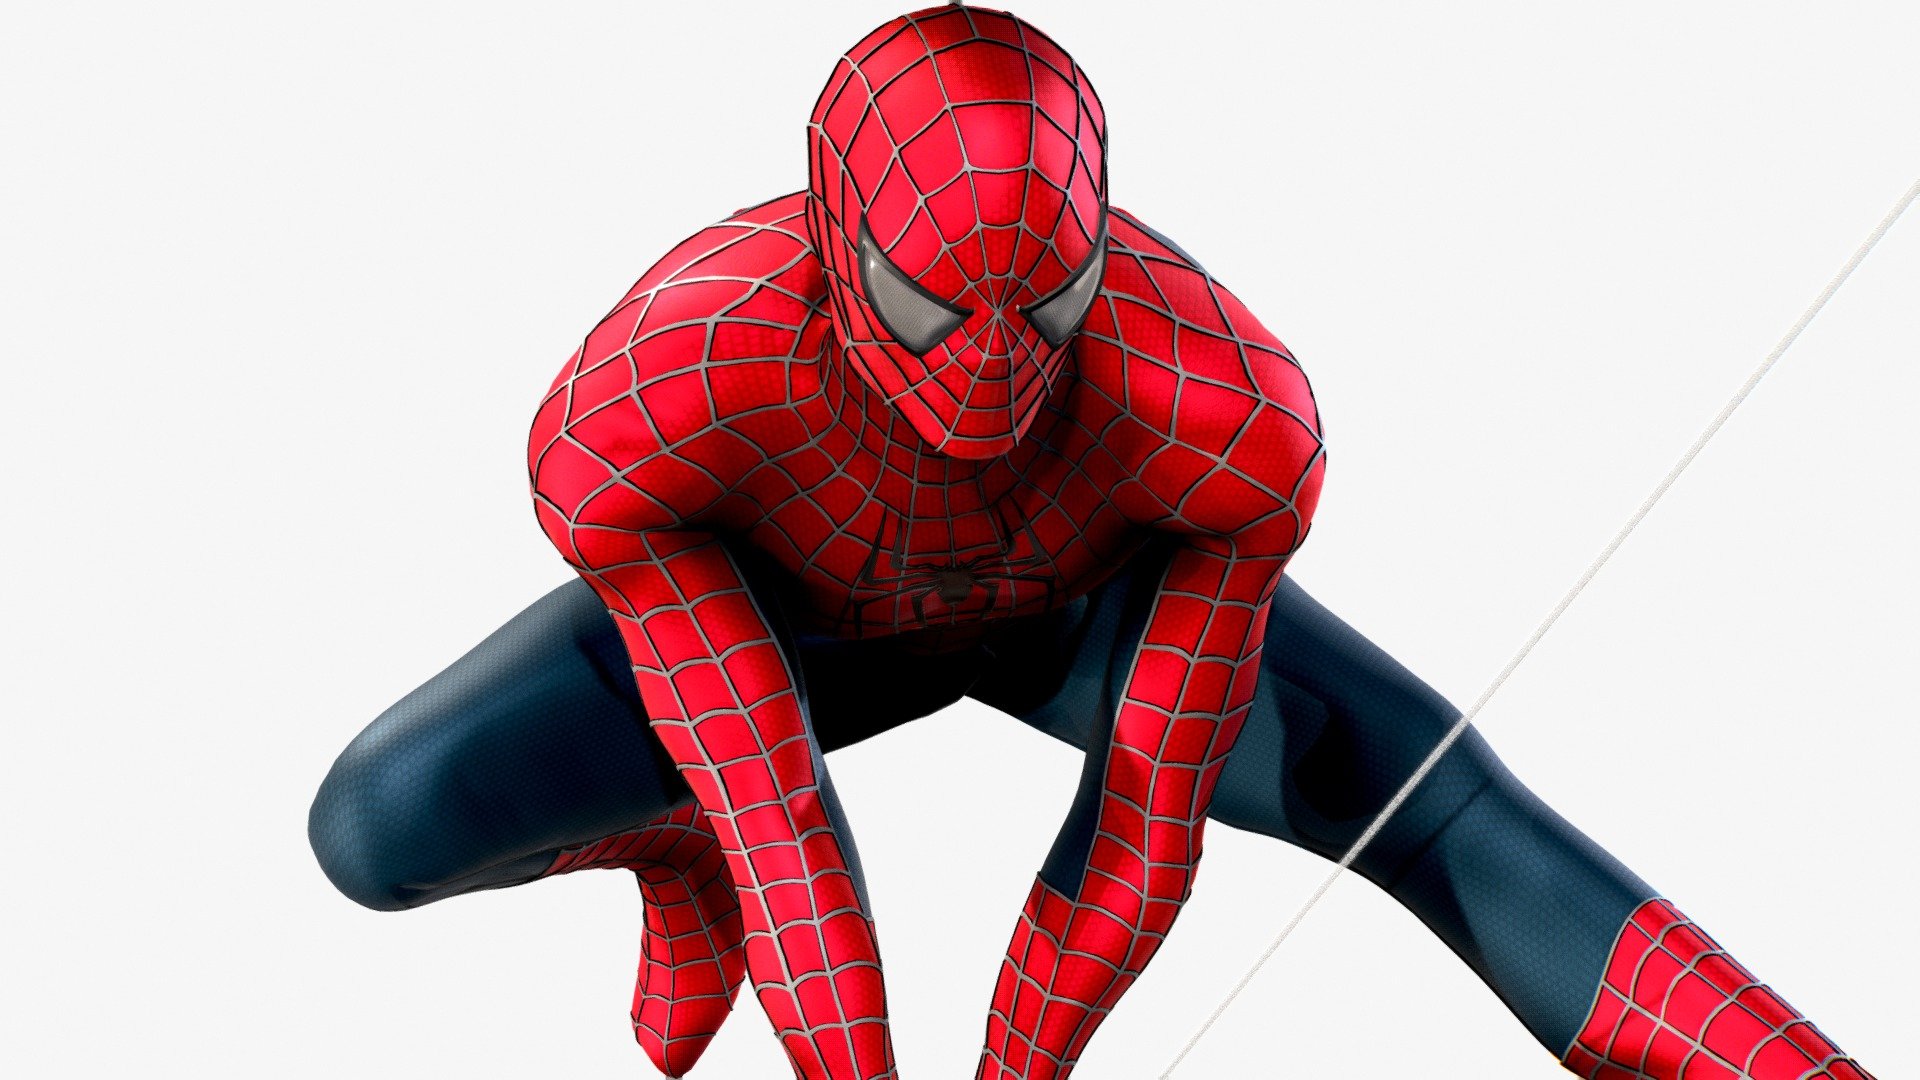 Spider-Man 2 2004 Raimi Suit Updated Model.

Iconic Pose inspired by Promo Image.

Created in Blender 3d model